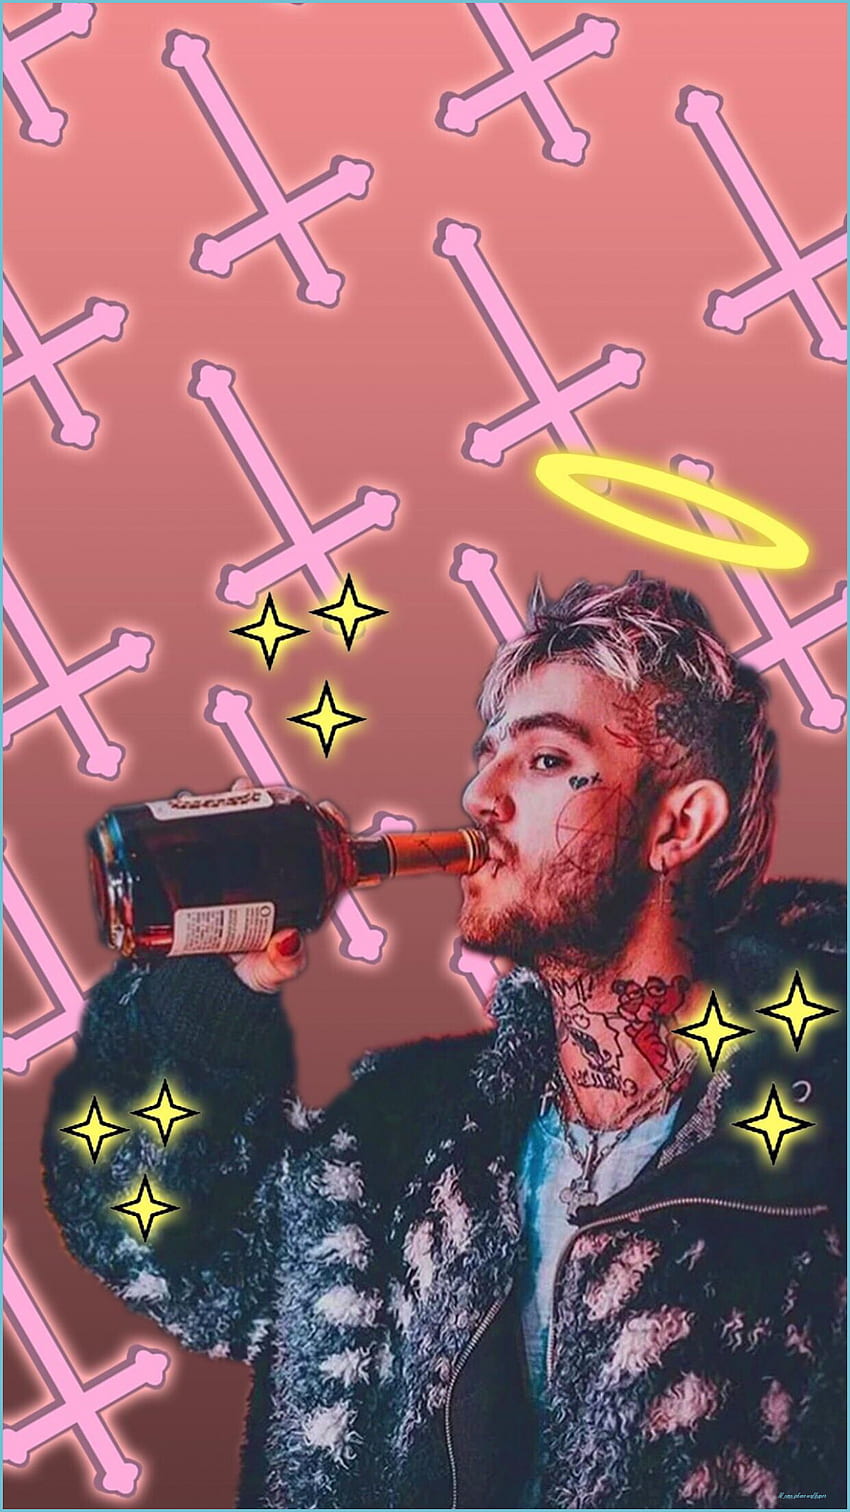 IPhone I Made For Gus : LilPeep - Lil Peep iPhone, Cool Lil Peep HD phone wallpaper